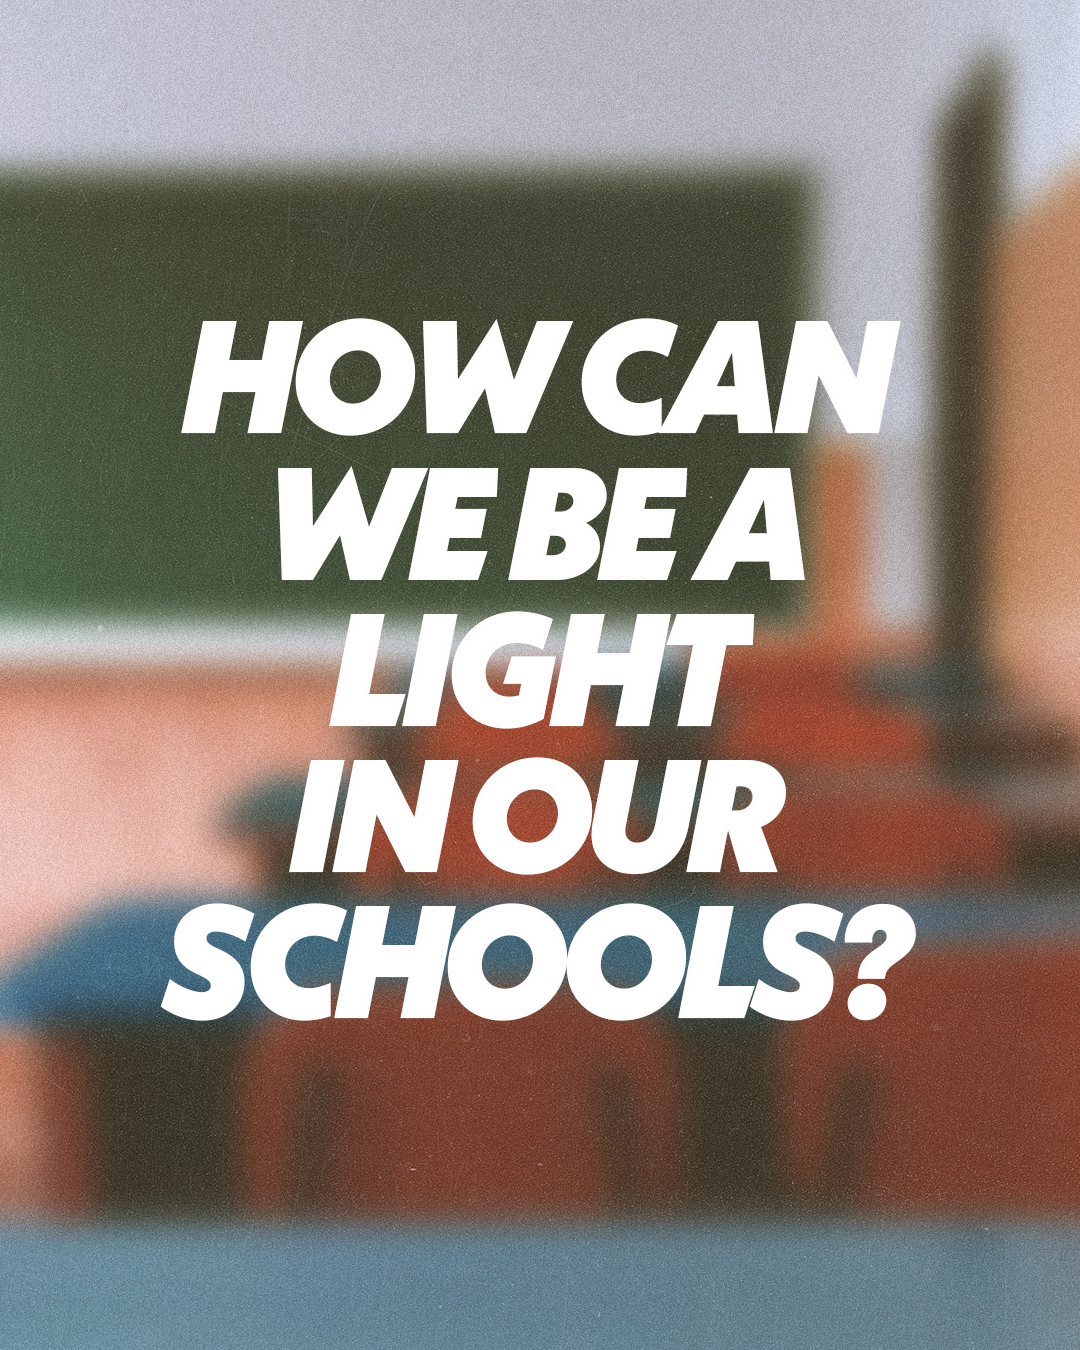 How can we be a light in our schools?